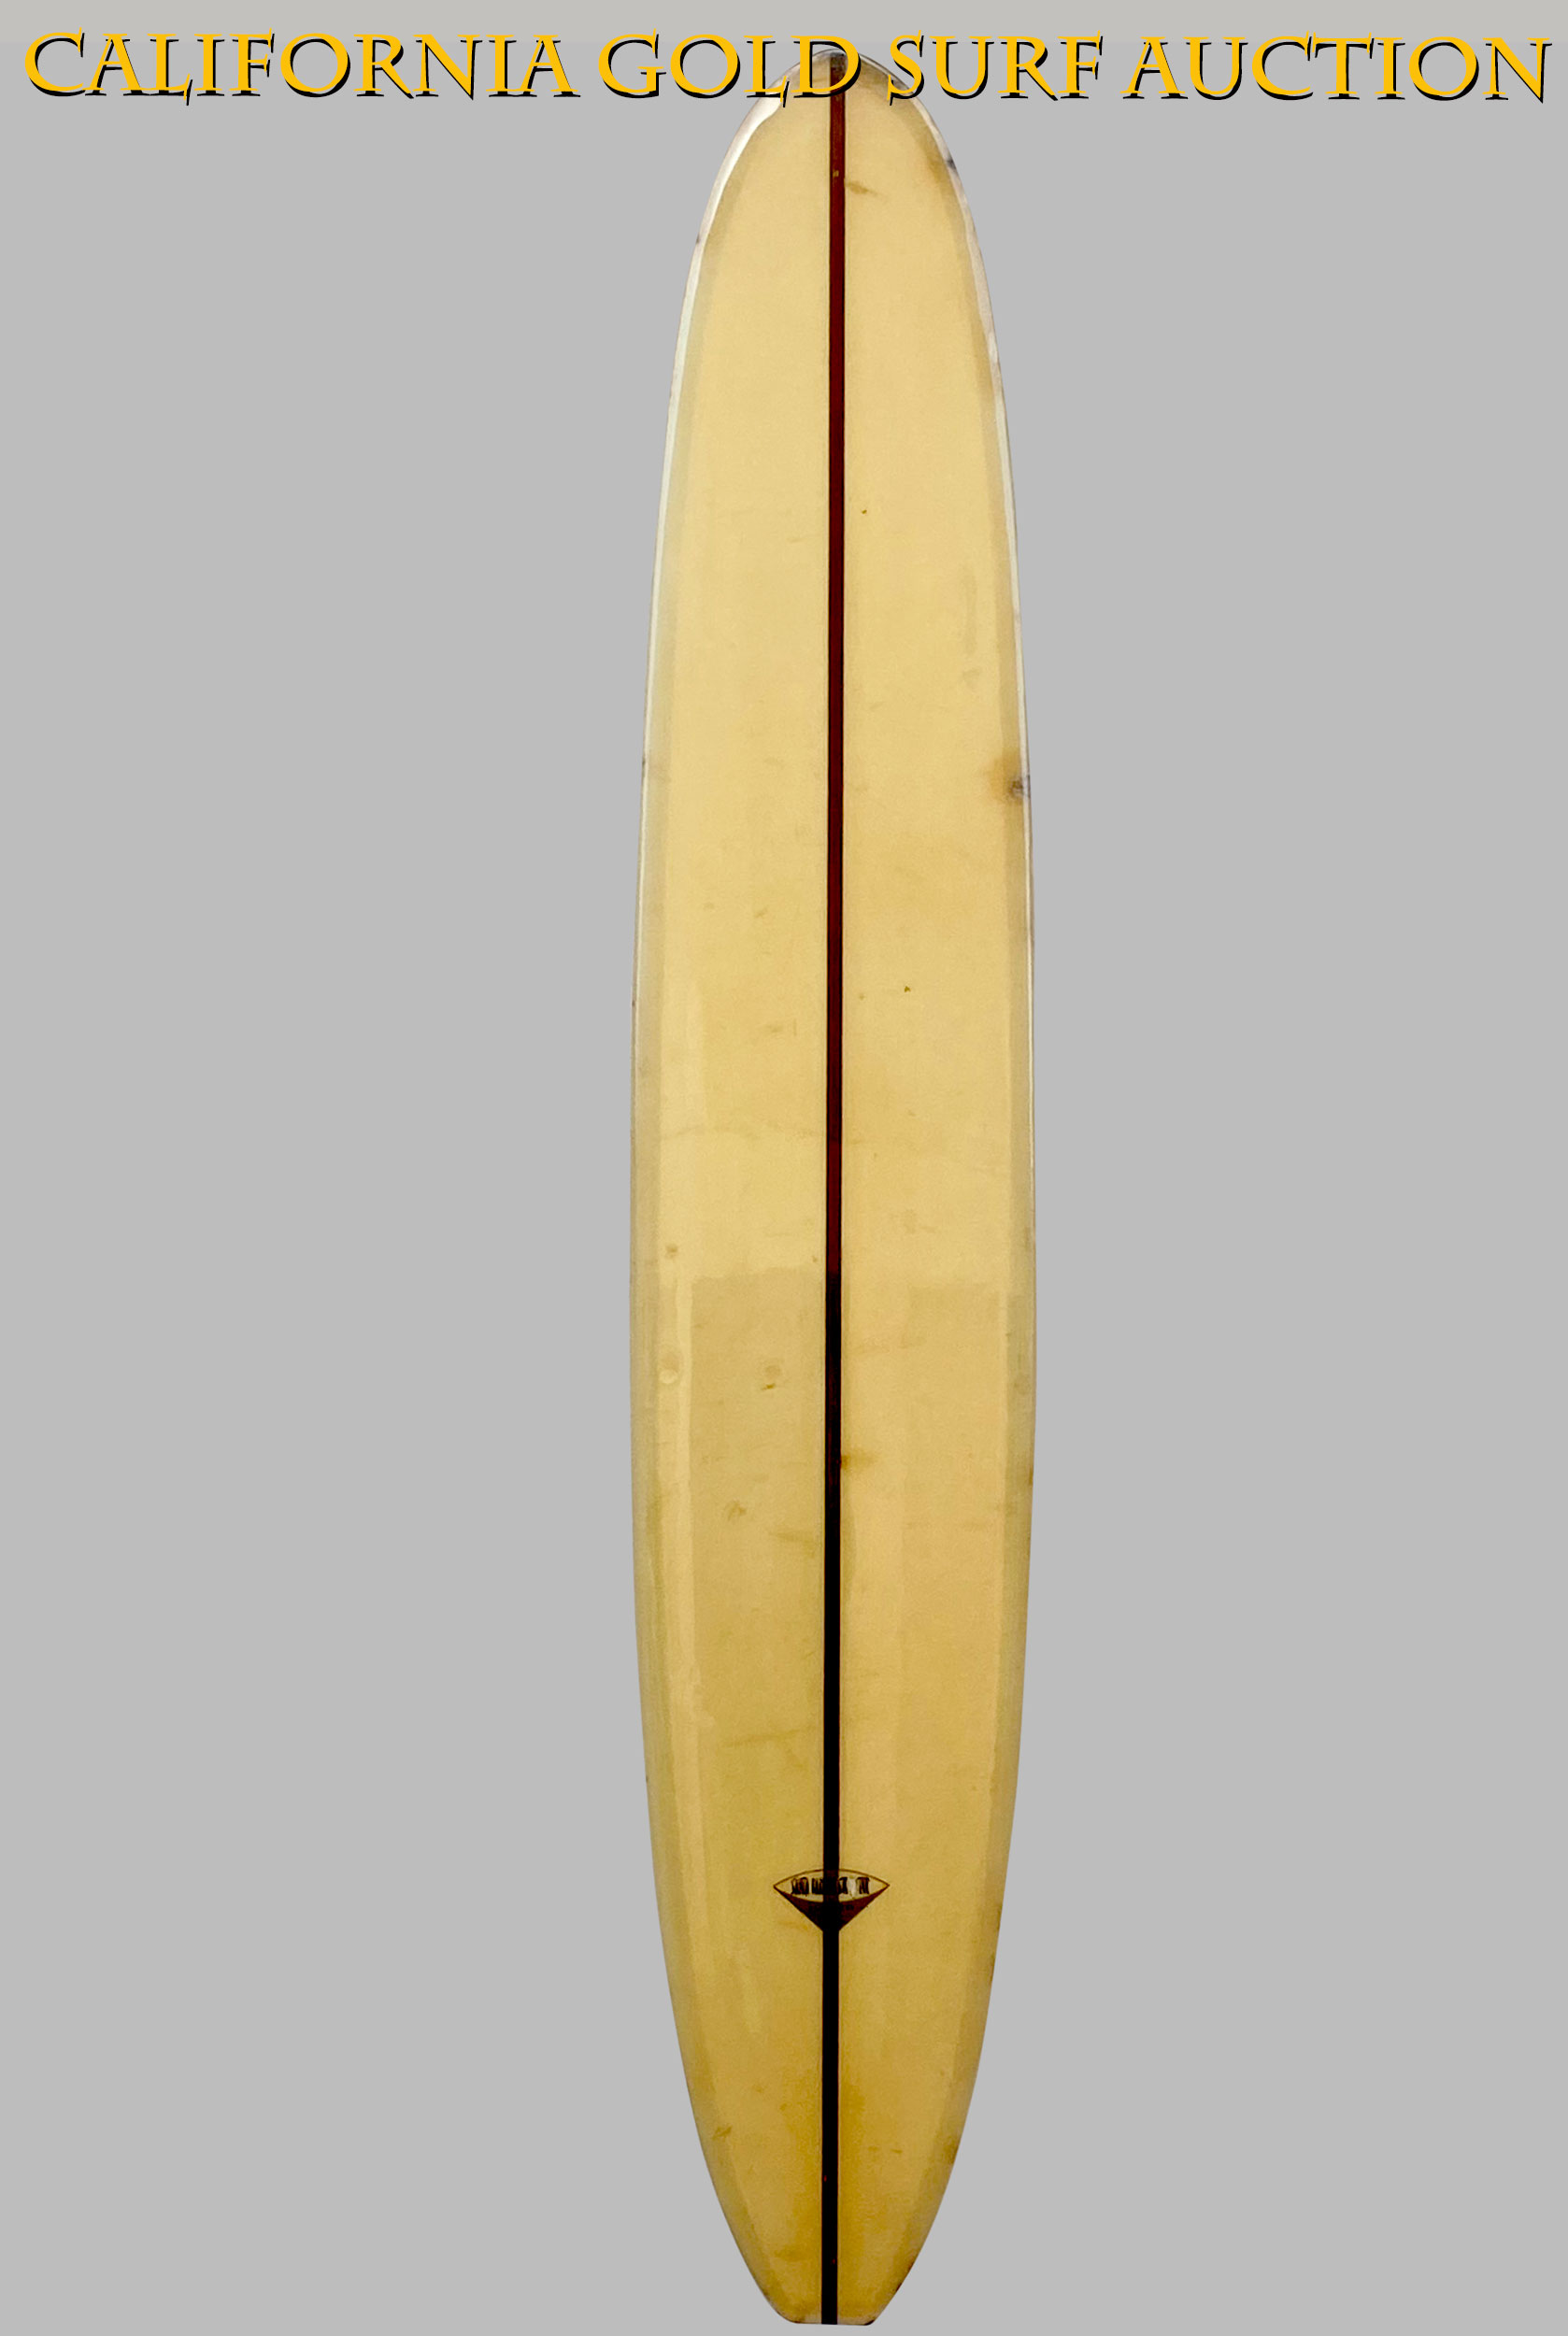 California Gold Surf Auction